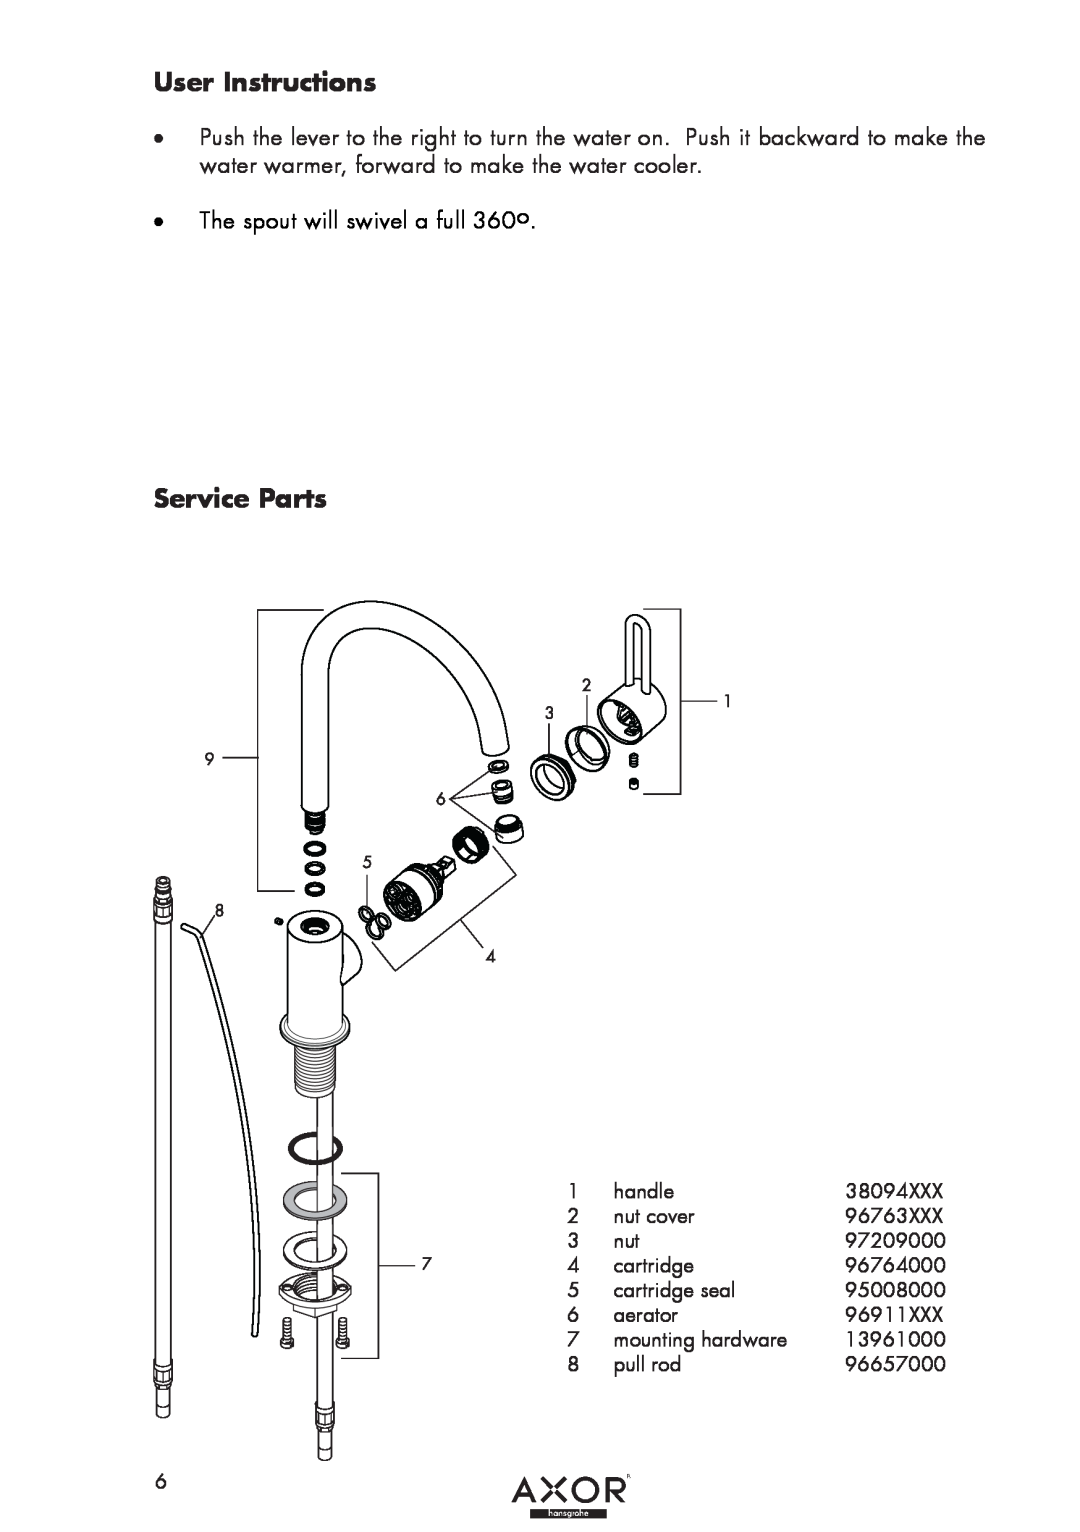 Axor 38030XX1 installation instructions User Instructions, Service Parts, The spout will swivel a full 360o 